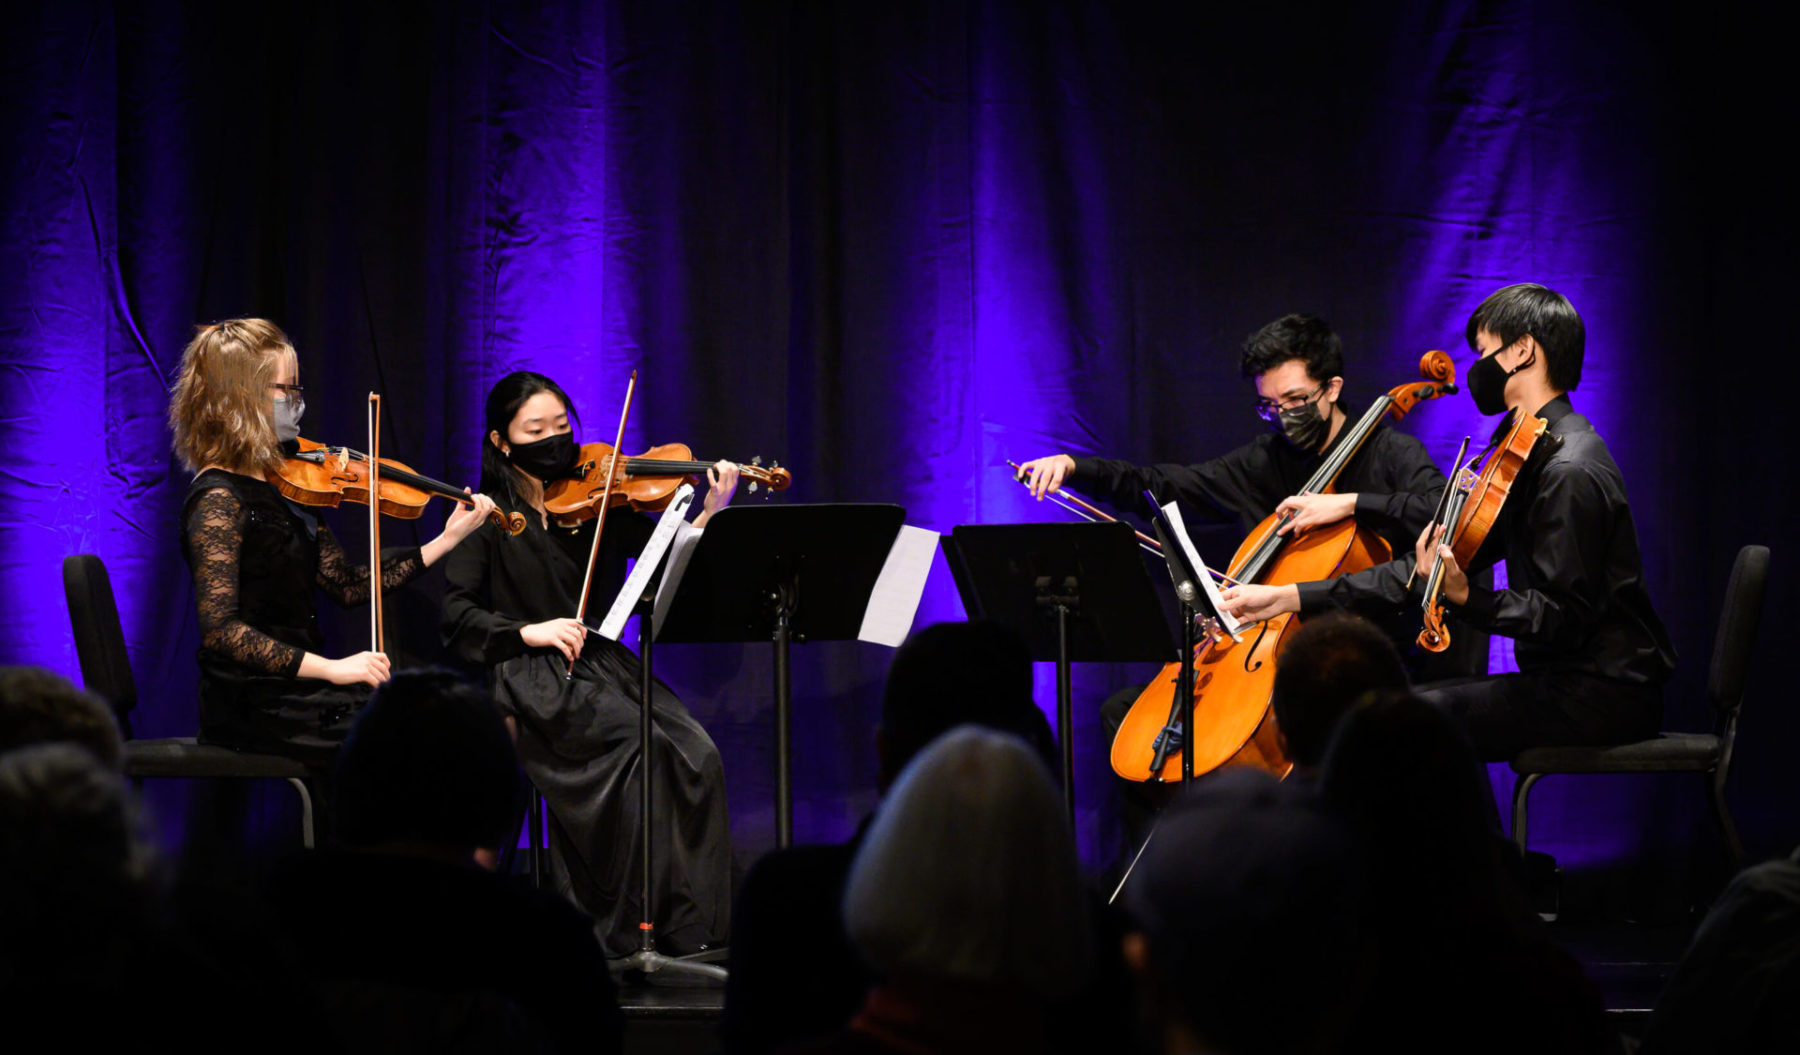 Cedar Quartet performing at the Roundhouse